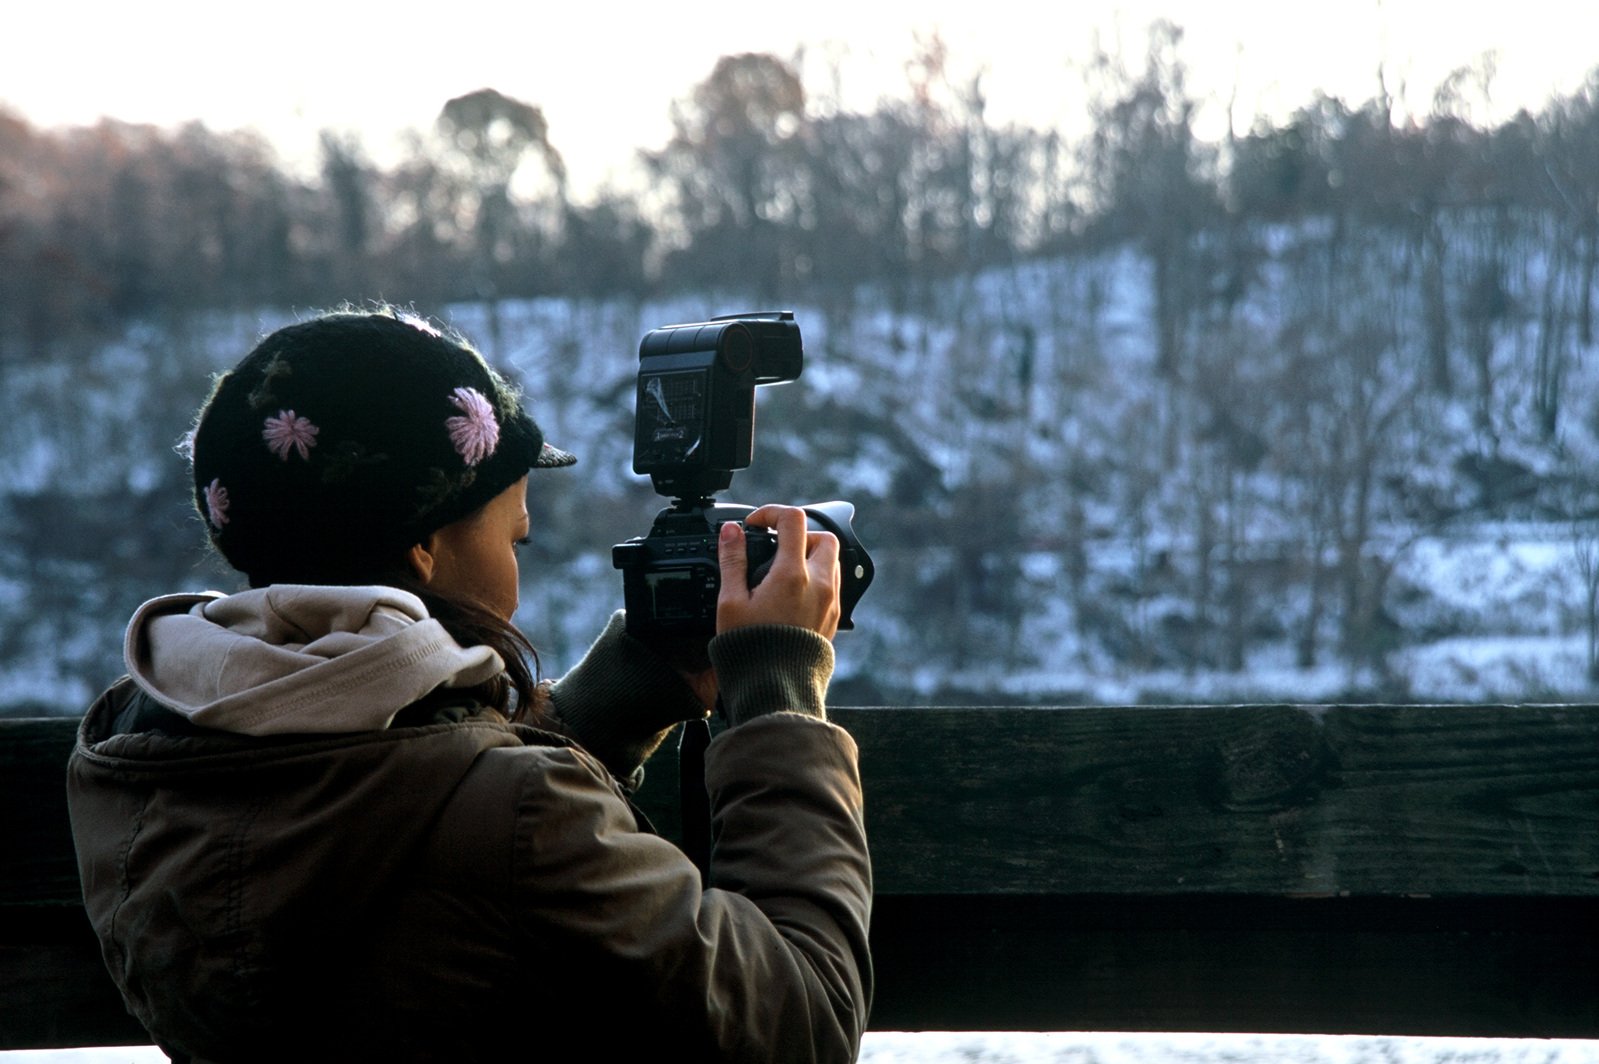 woman taking po with camera on railing of snowy countryside